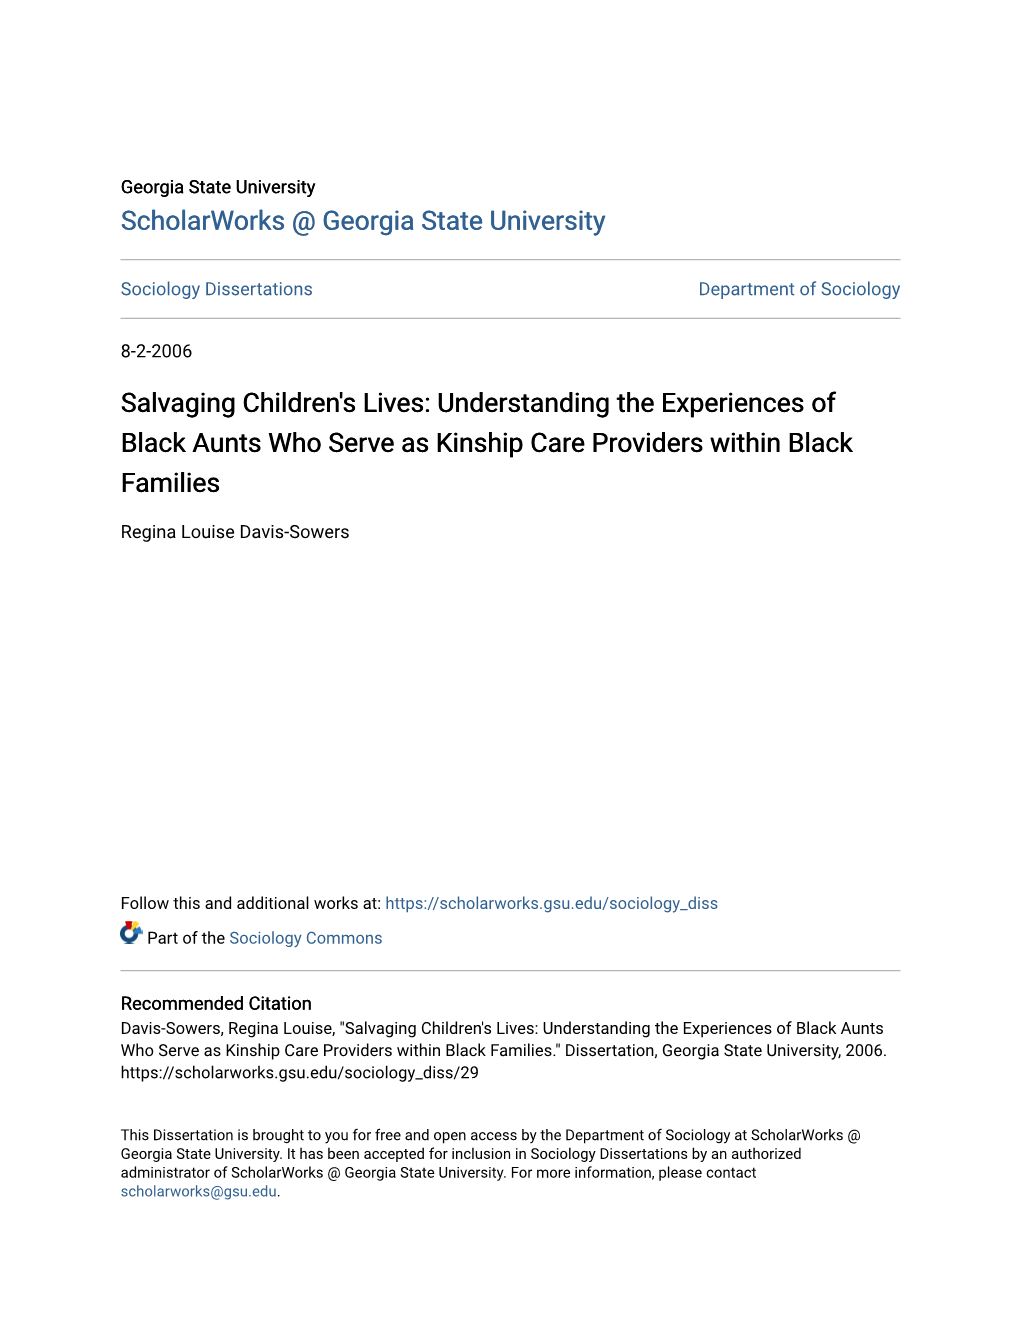 Salvaging Children's Lives: Understanding the Experiences of Black Aunts Who Serve As Kinship Care Providers Within Black Families